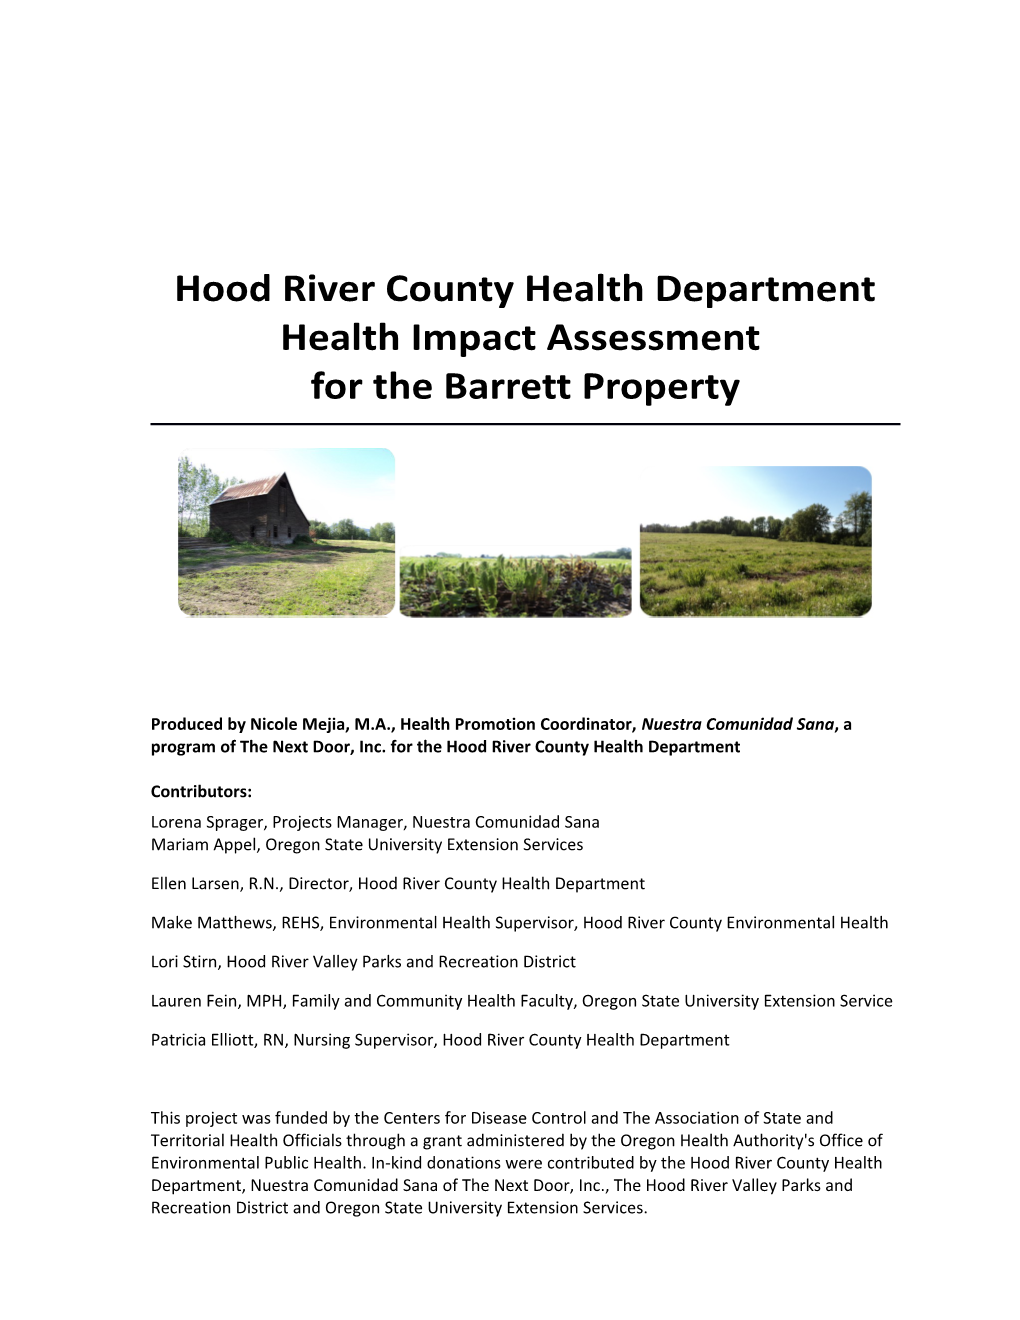 Hood River County Health Department 2011